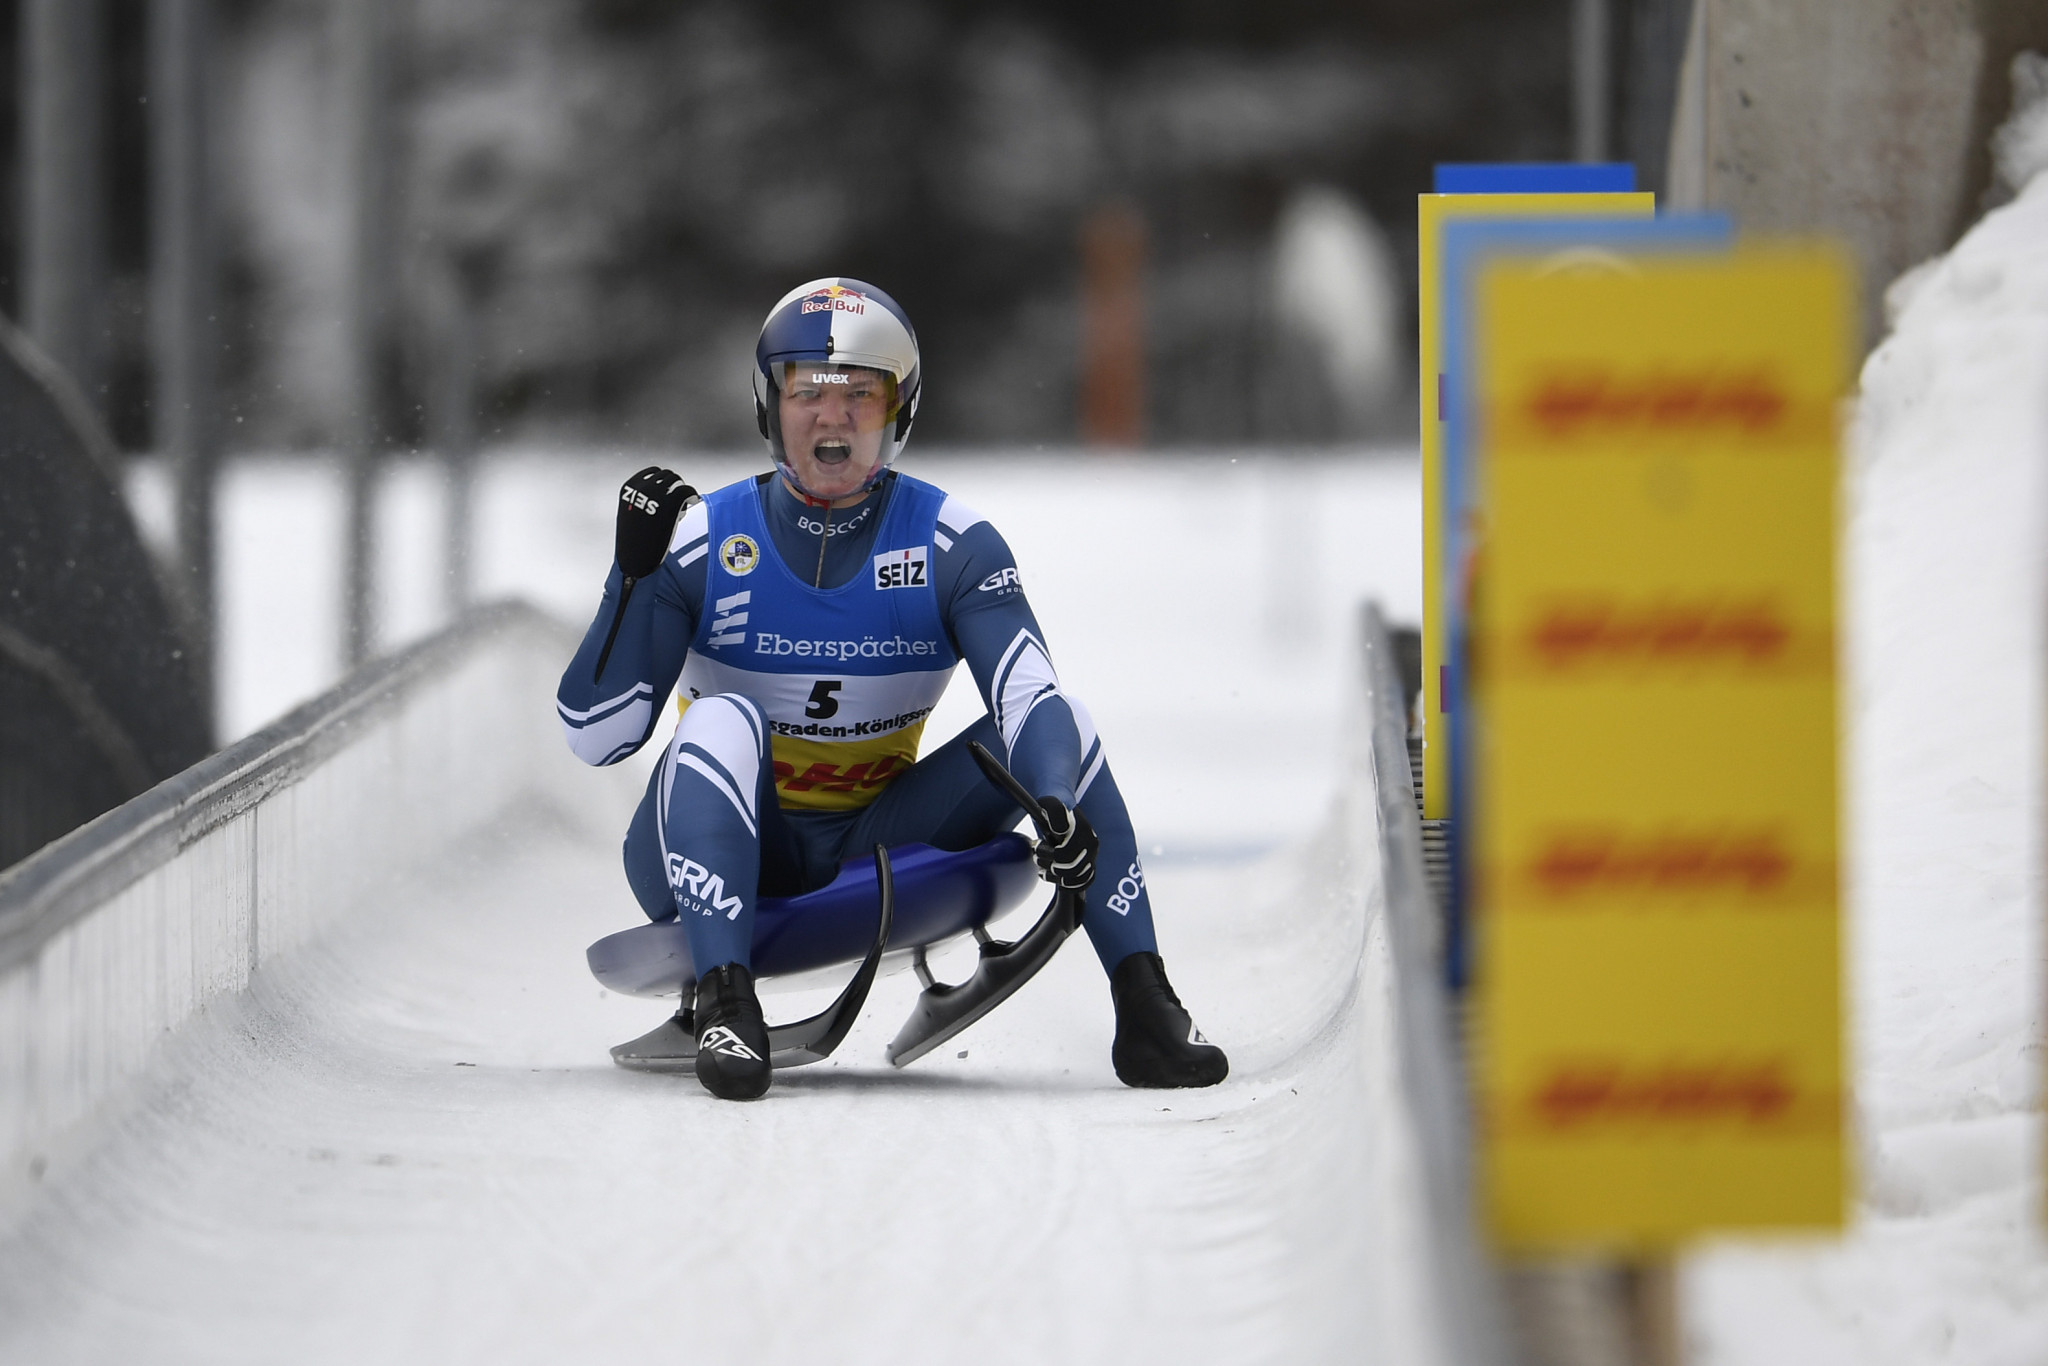 Luge world champion Repilov faces COVID-19 scare at season-opening World Cup in China